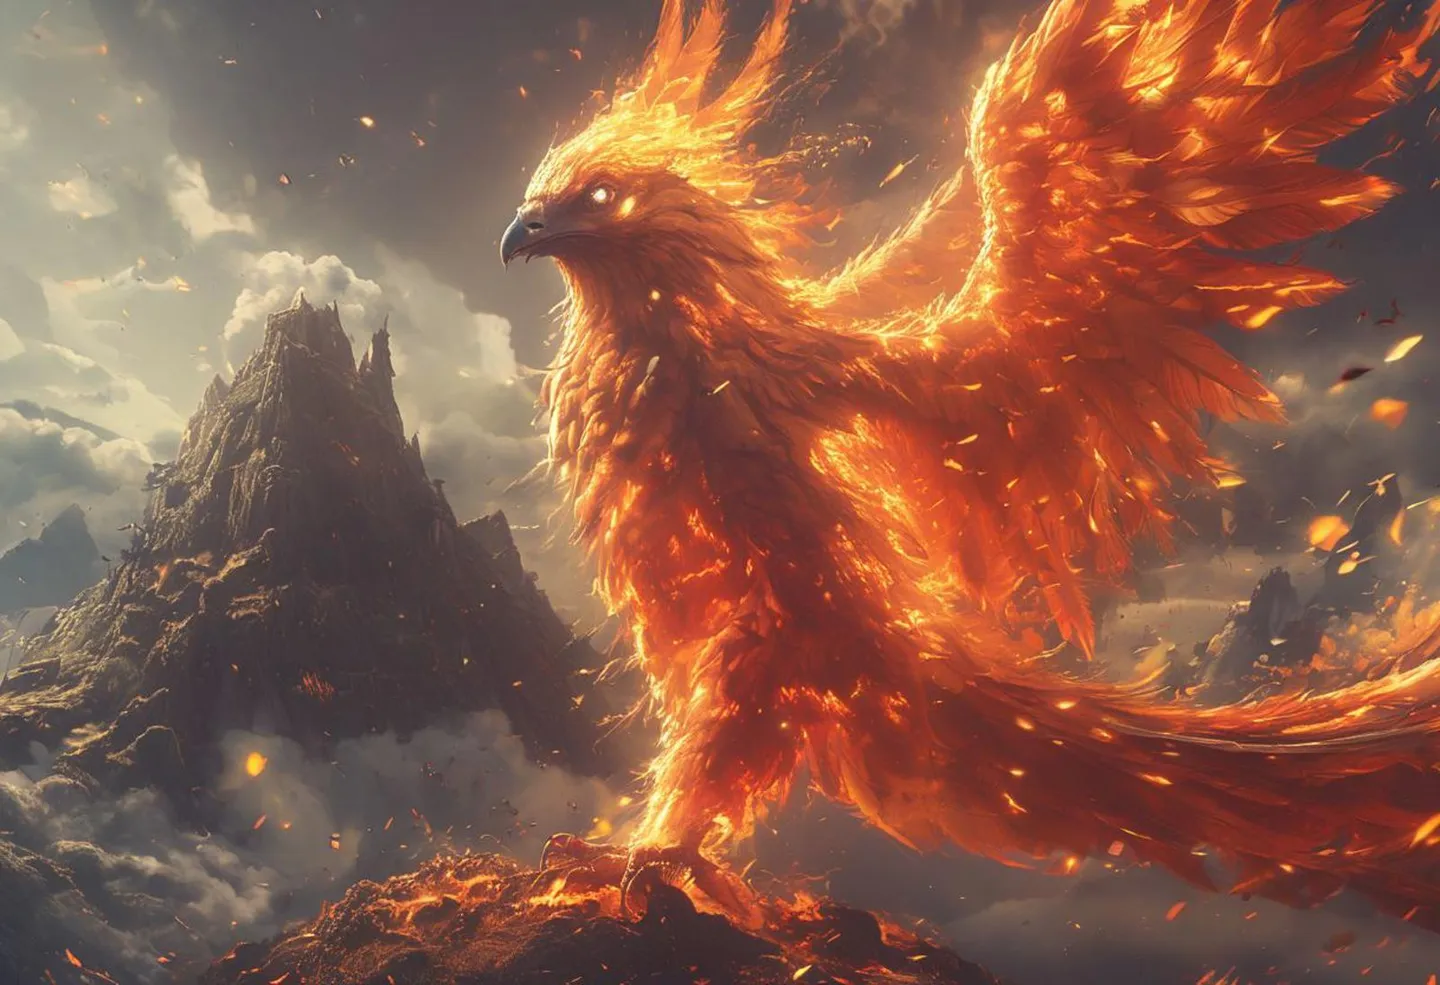 Mythical phoenix with fiery wings rising against a mountainous backdrop, AI generated using Stable Diffusion.